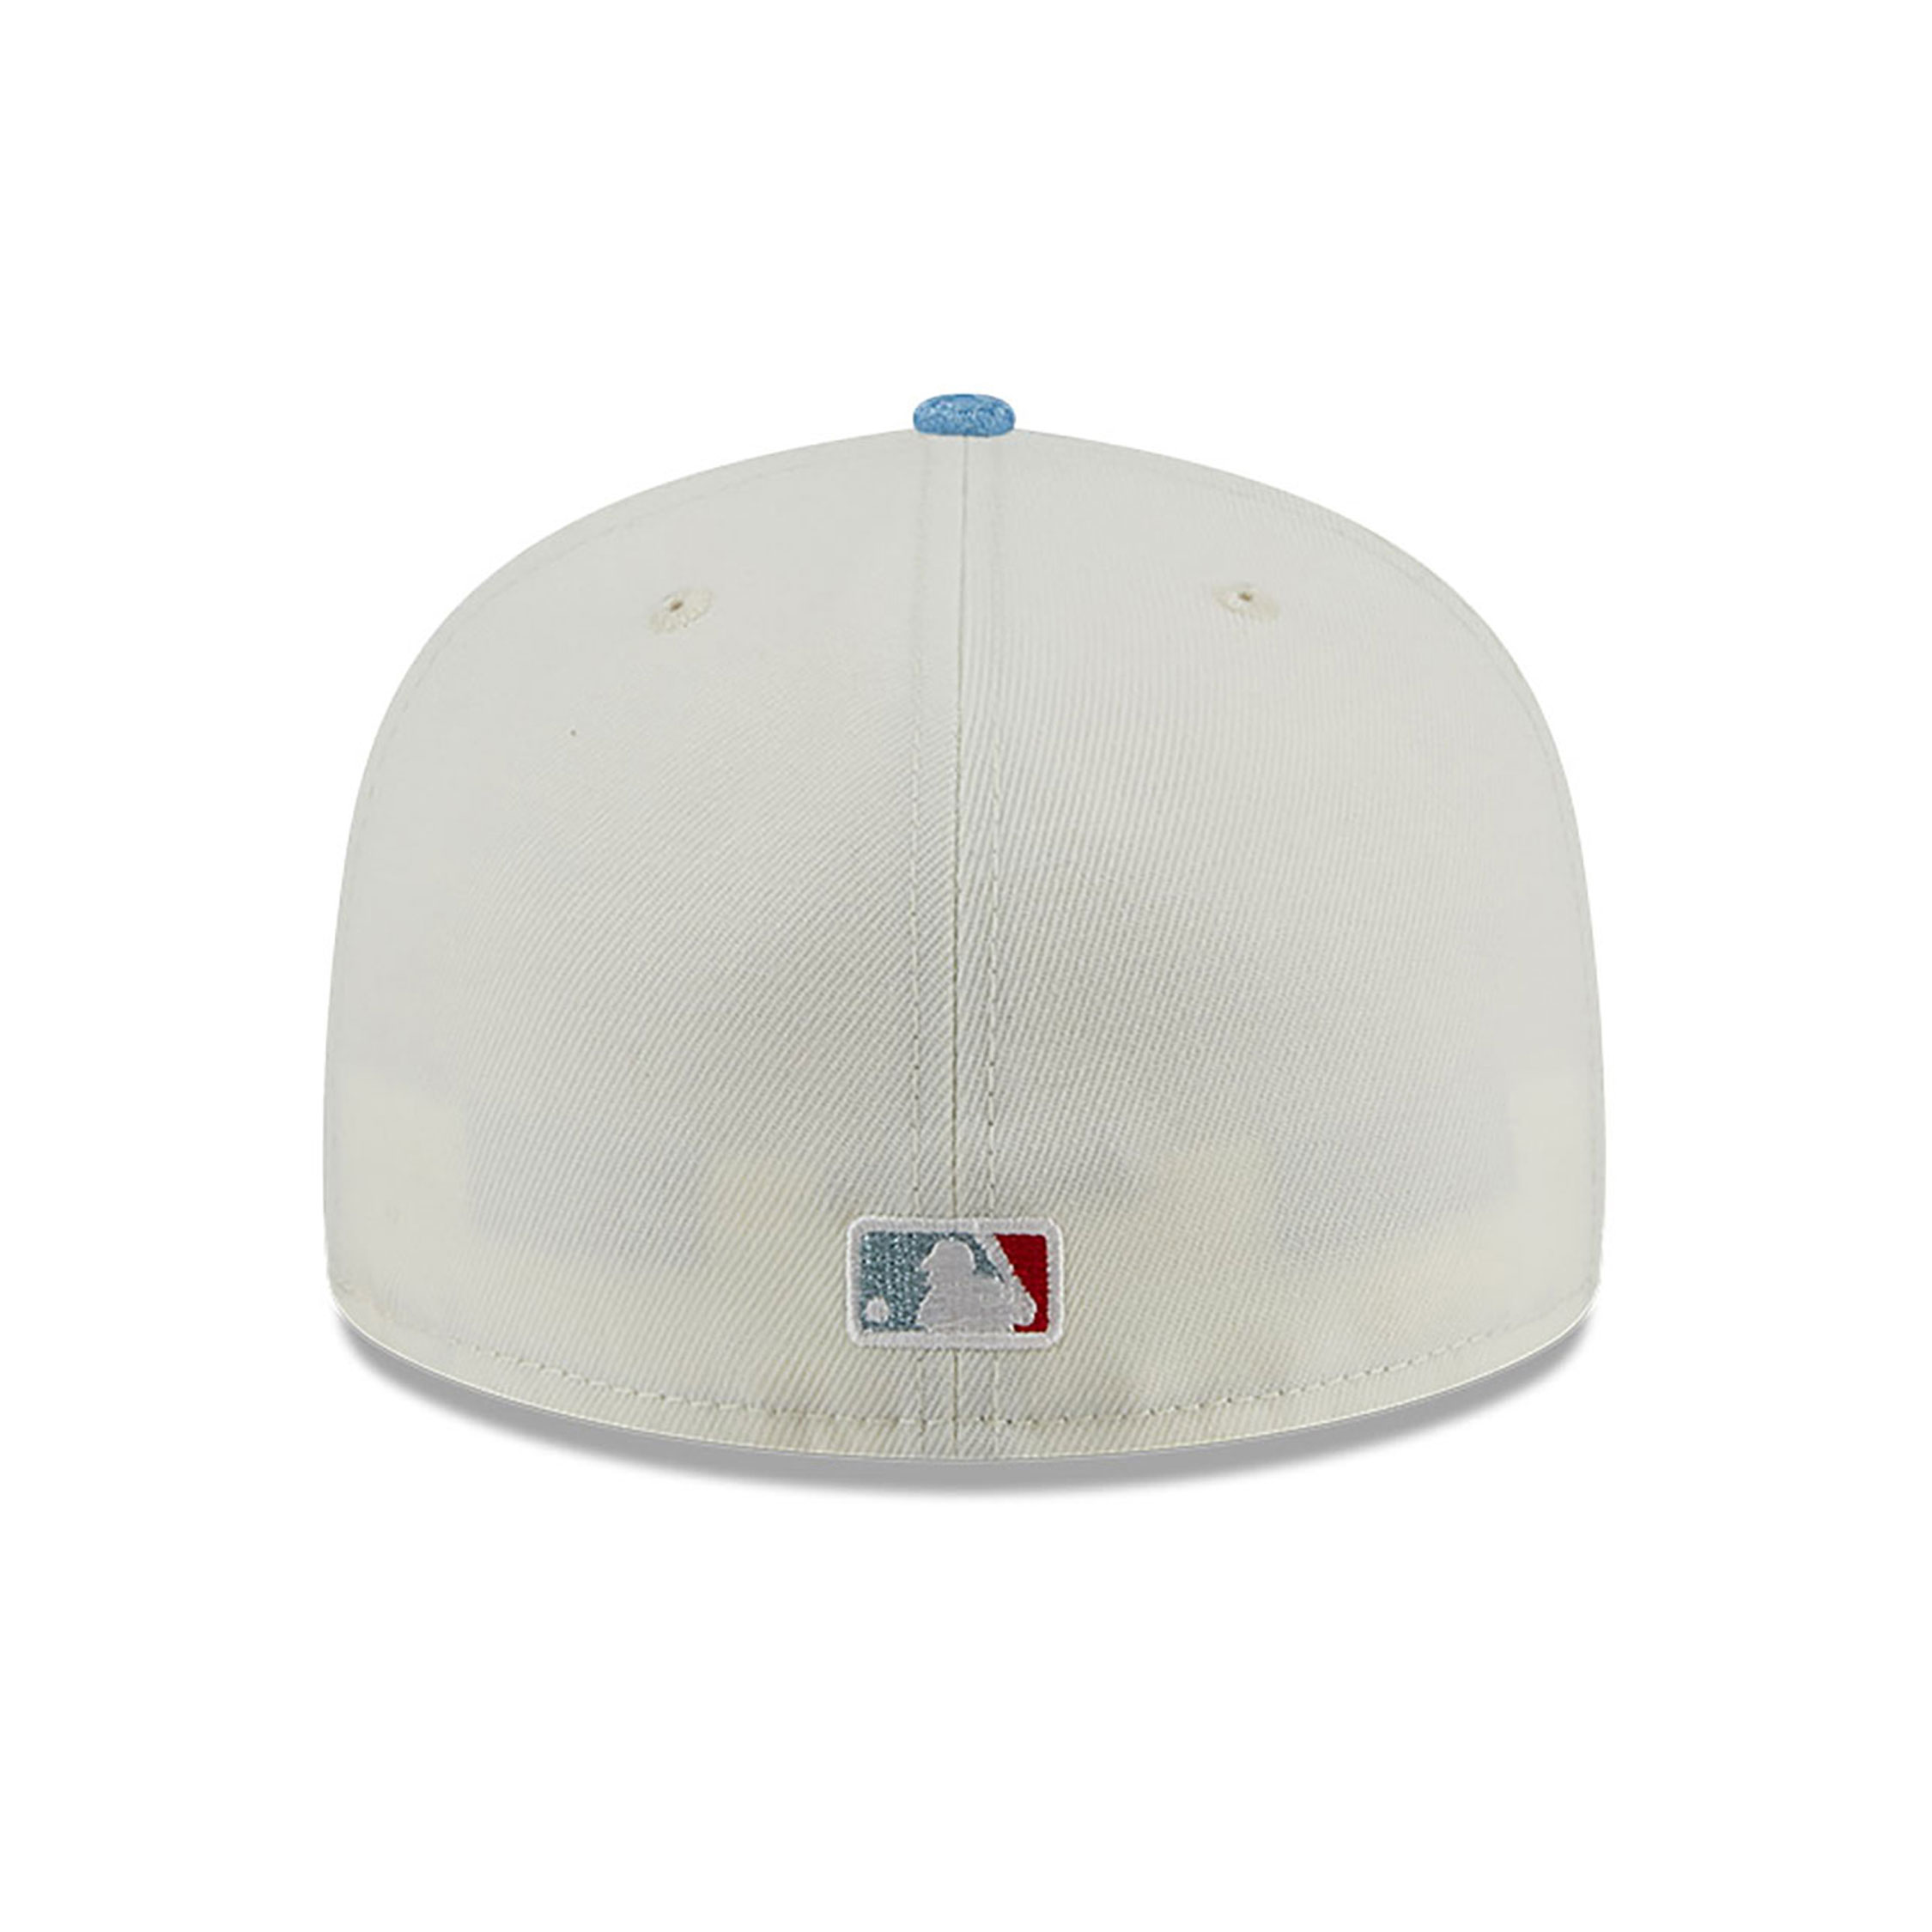 Chicago Cubs City Mesh Chrome White 59FIFTY Fitted Cap